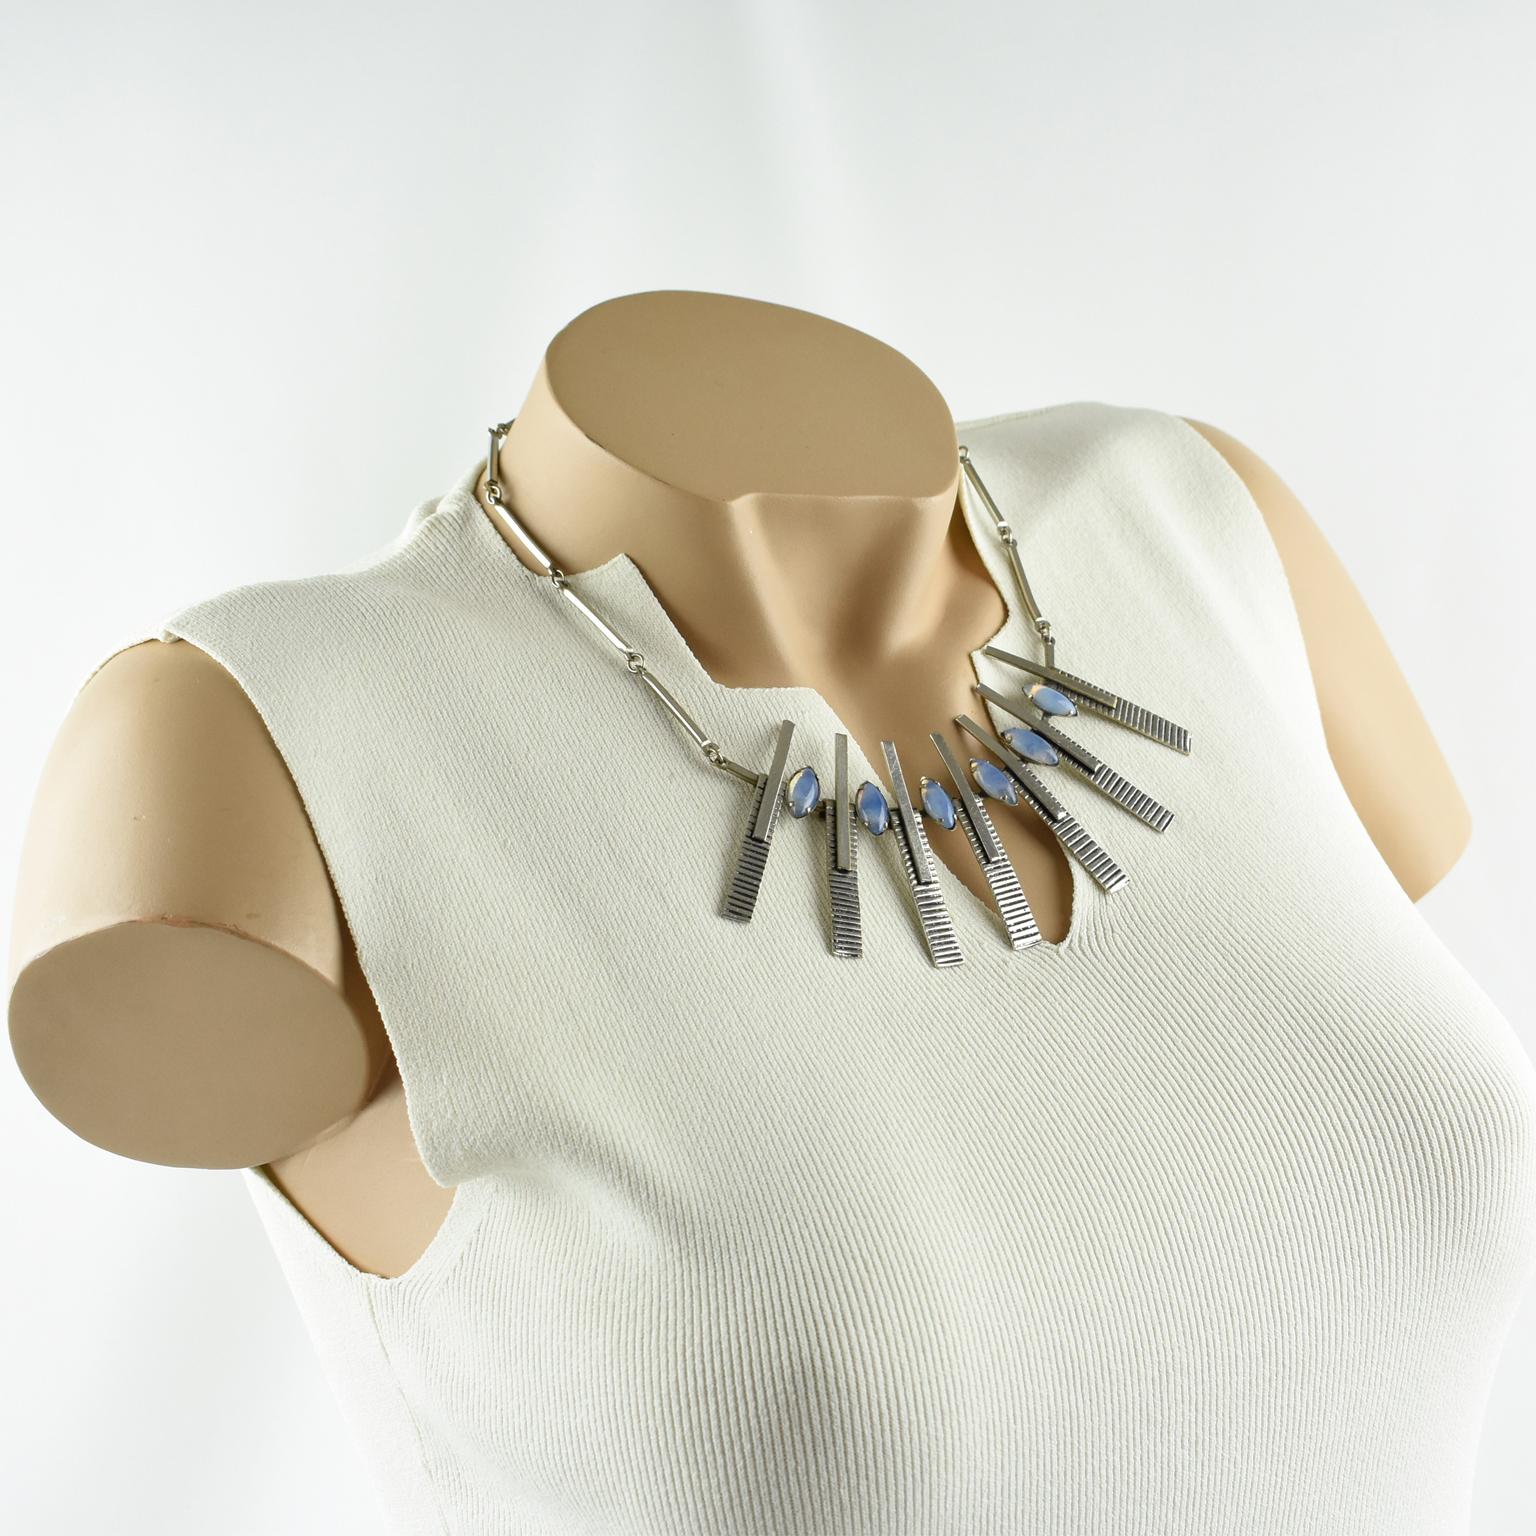 This stunning 1970s Space Age choker necklace has a modernist geometric central pendant. The necklace boasts a rigid chrome-plated metal chain adorned with a large central pendant and has a hook-closing clasp. The geometric is topped with oval